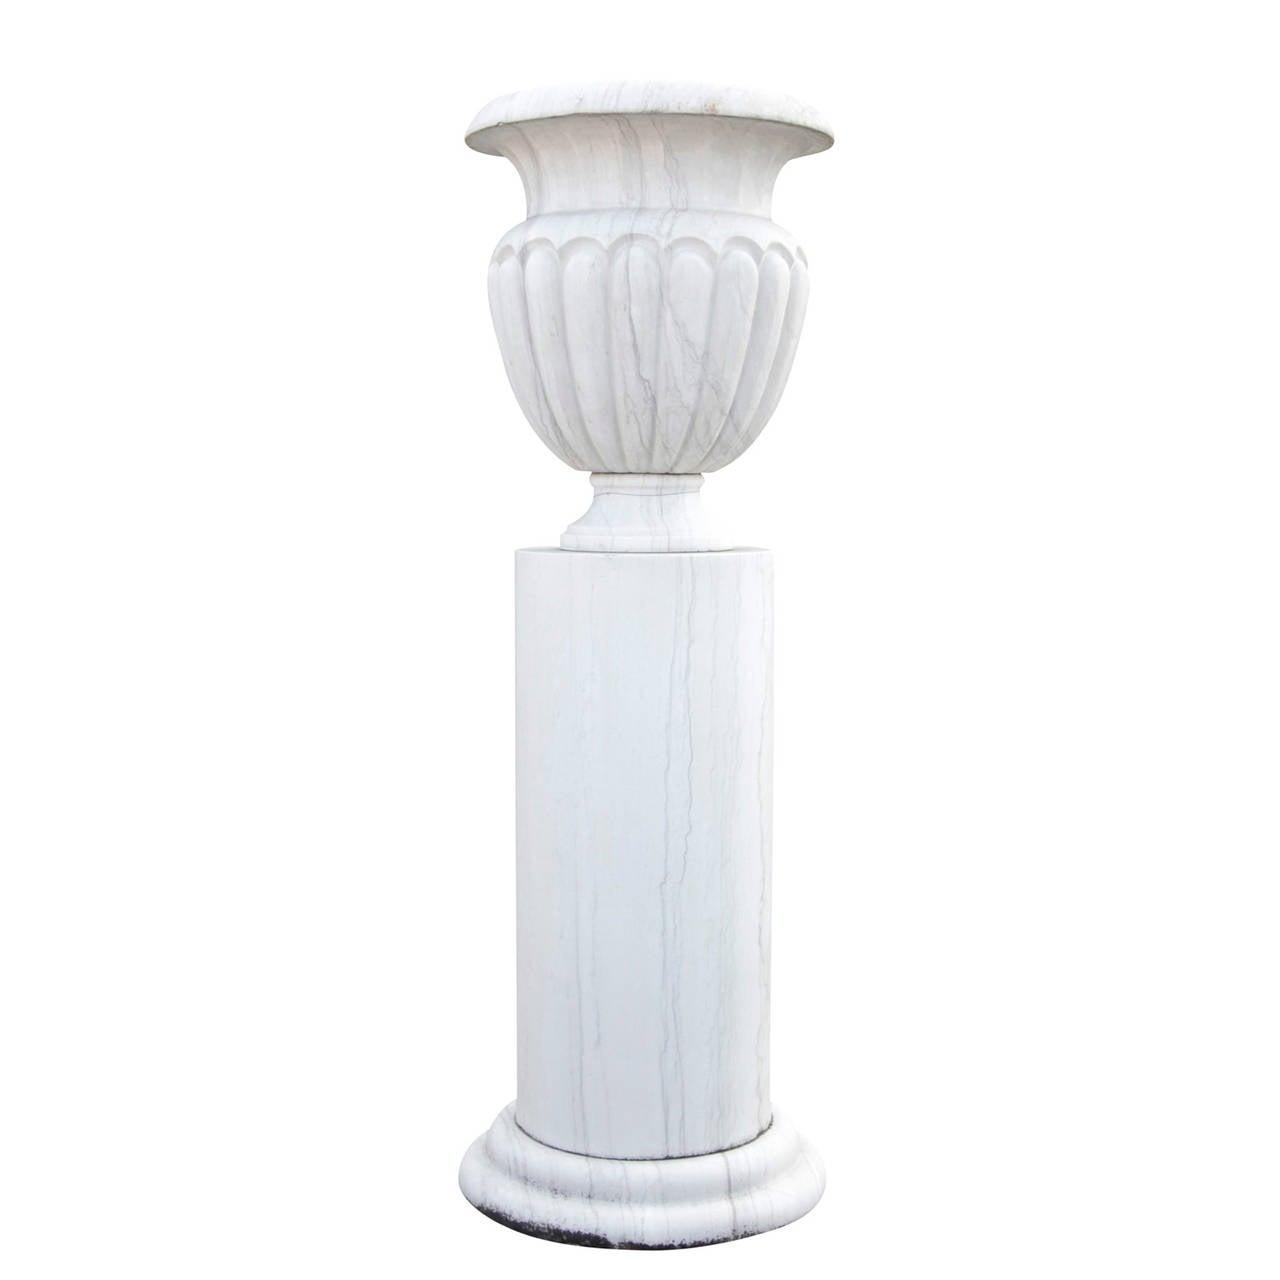 Pair Monumental Marble Park Vases with pedestals from the 20th Century. The vases are hammered by hand and have a attic base with a smooth Monolith column shaft. The vases are shaped like an antique column crater. The Body is tapered towards the